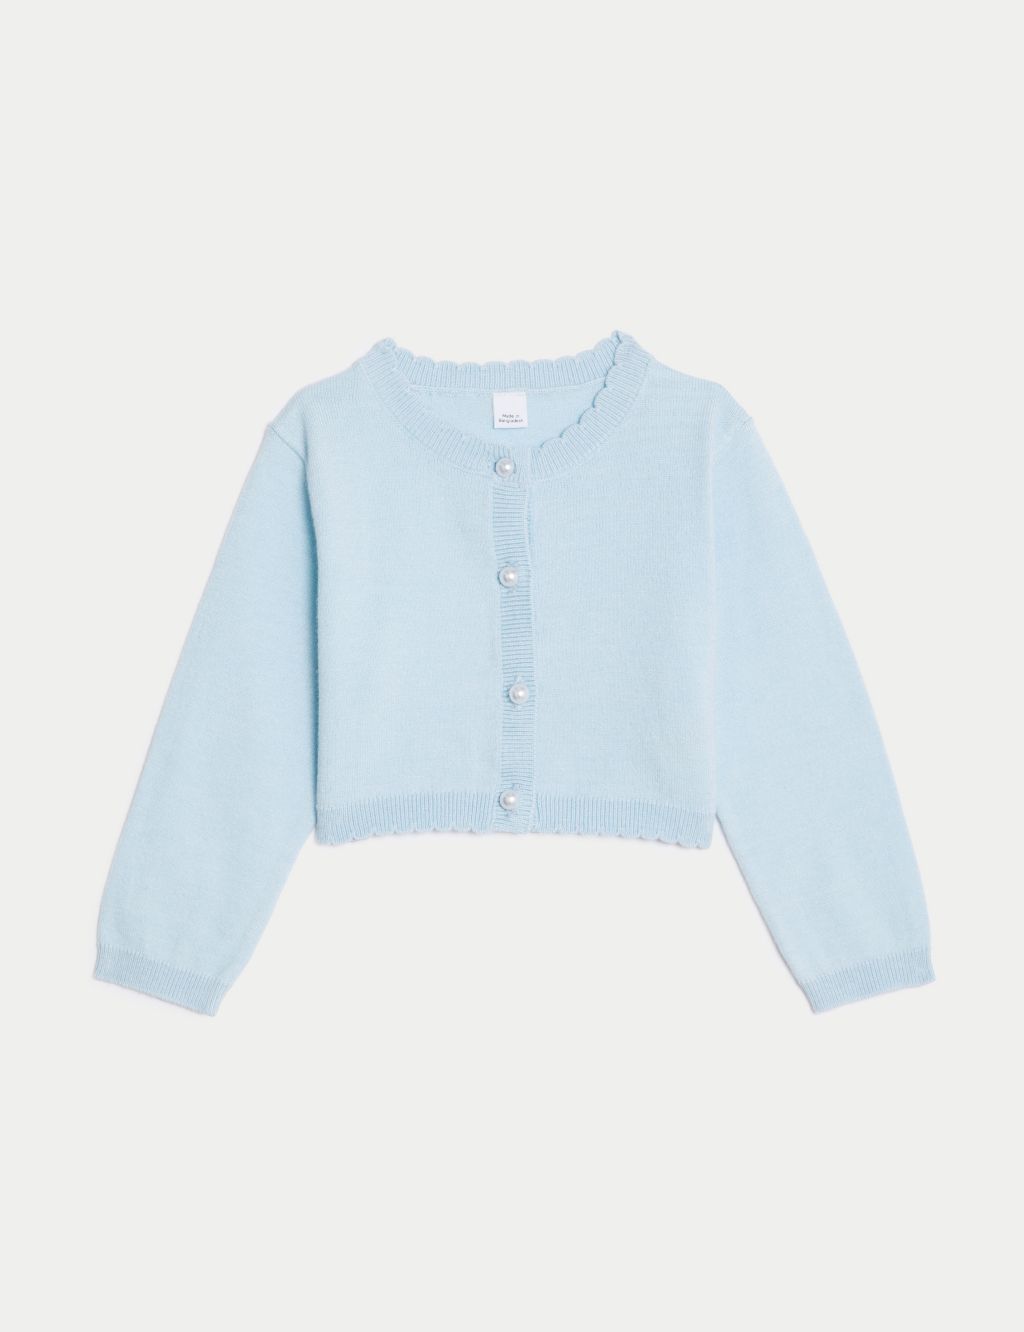 Knitted Cardigan (0-3 Yrs) image 1